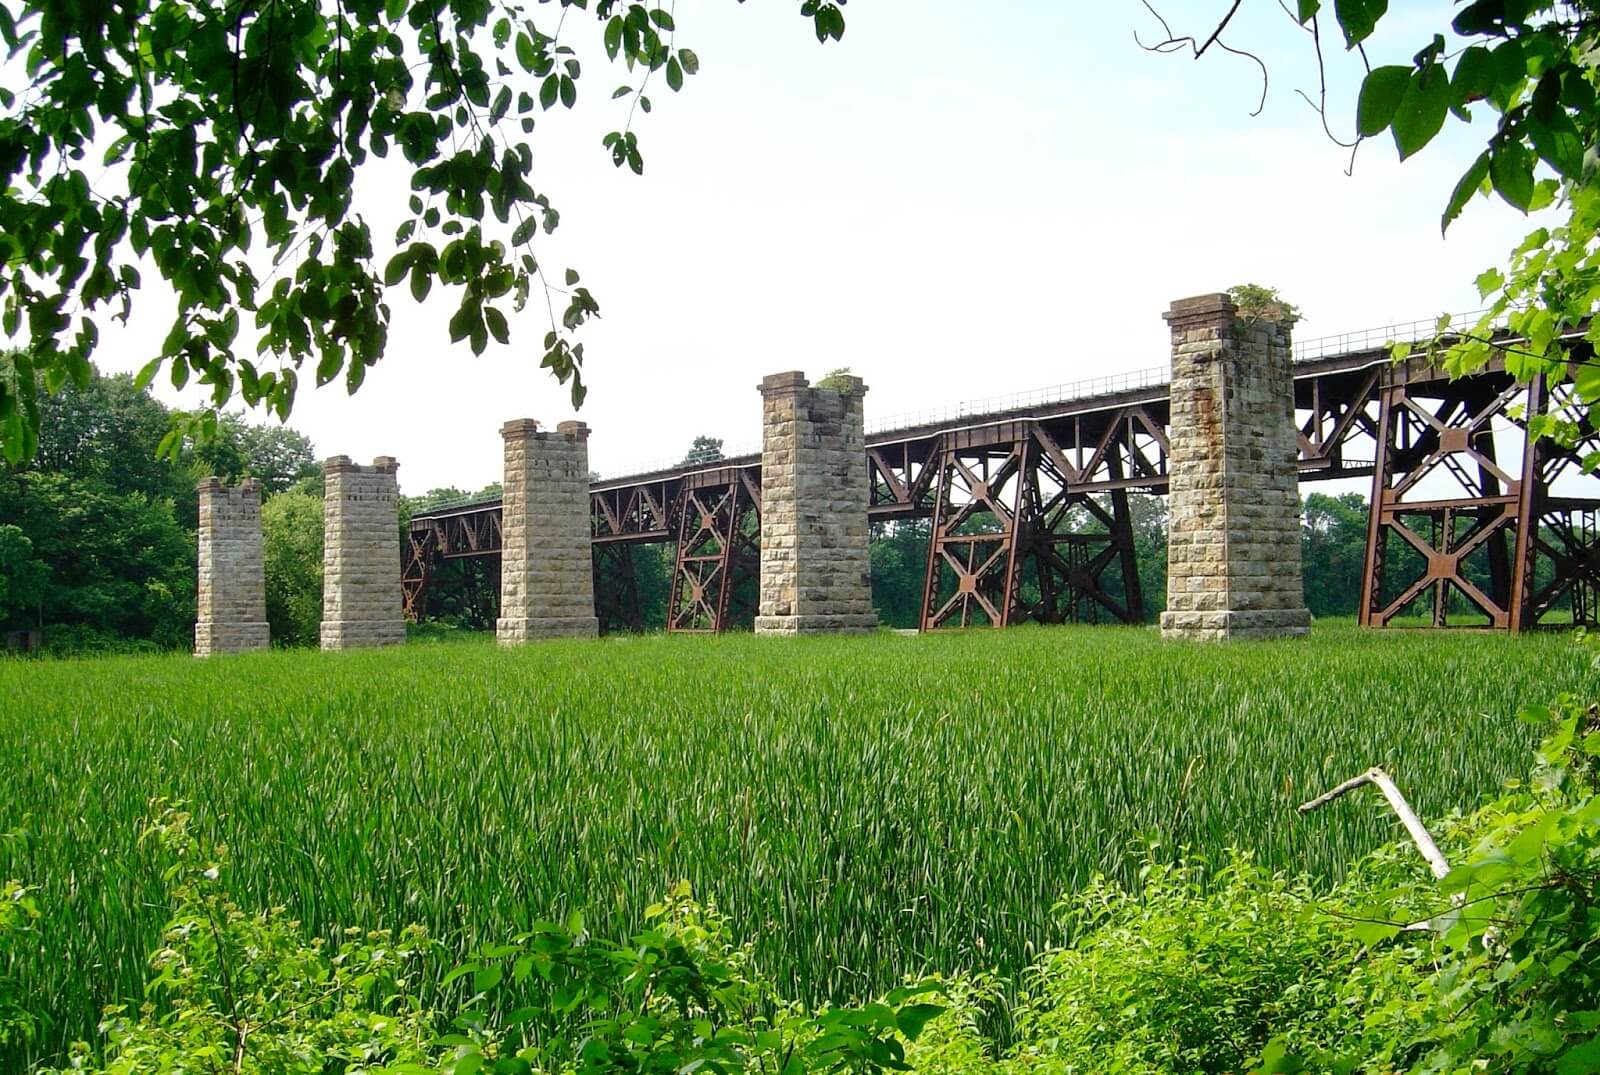 Neglected railway viaduct stone columns beside existing rail bridge surrounded by water vegetation